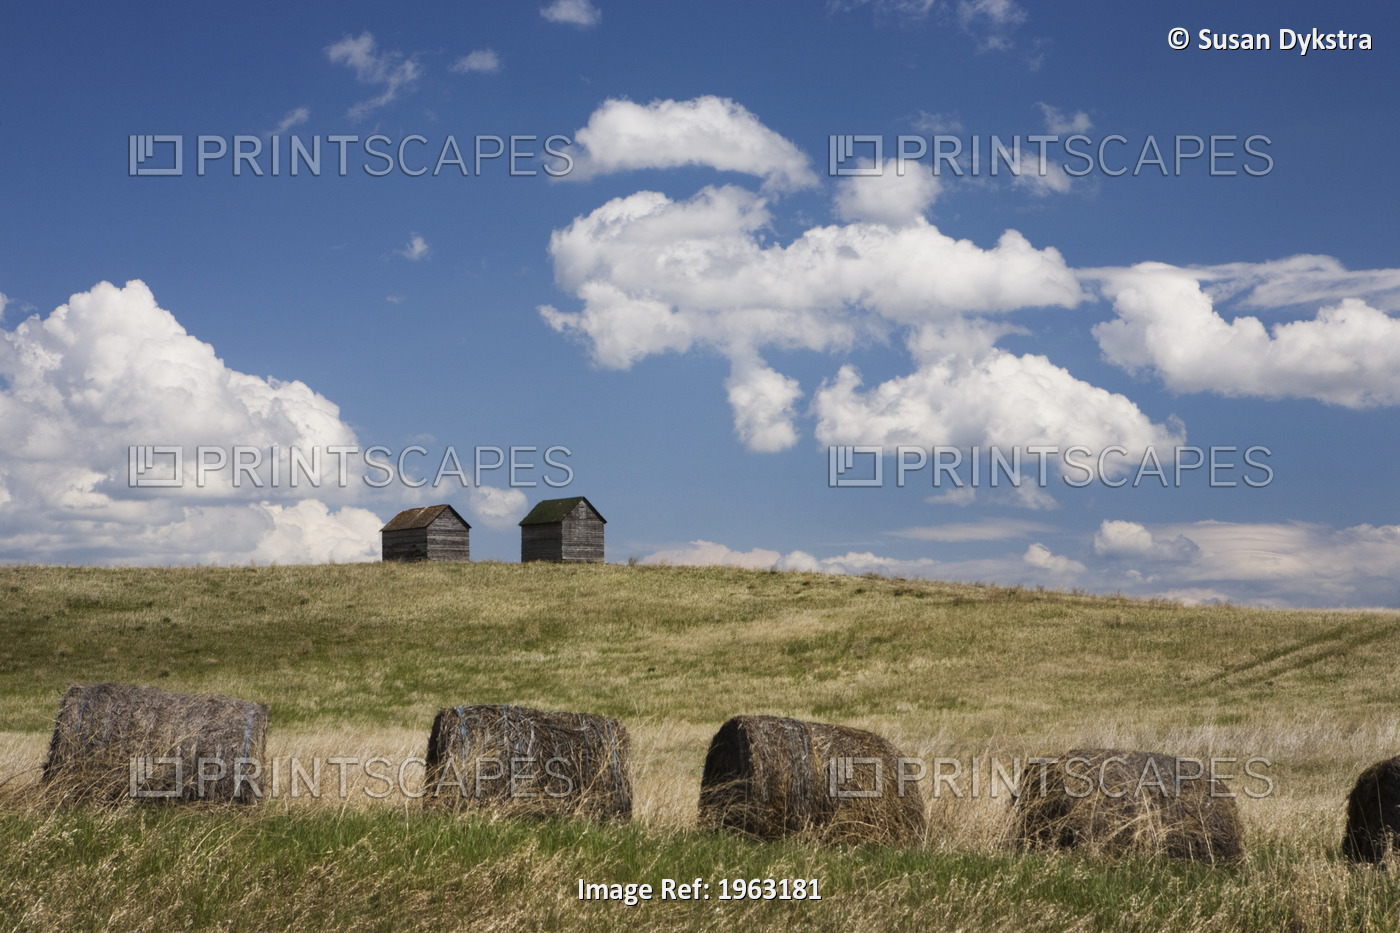 Old Sheds In A Field With Hay Bales; Winnipeg, Manitoba, Canada